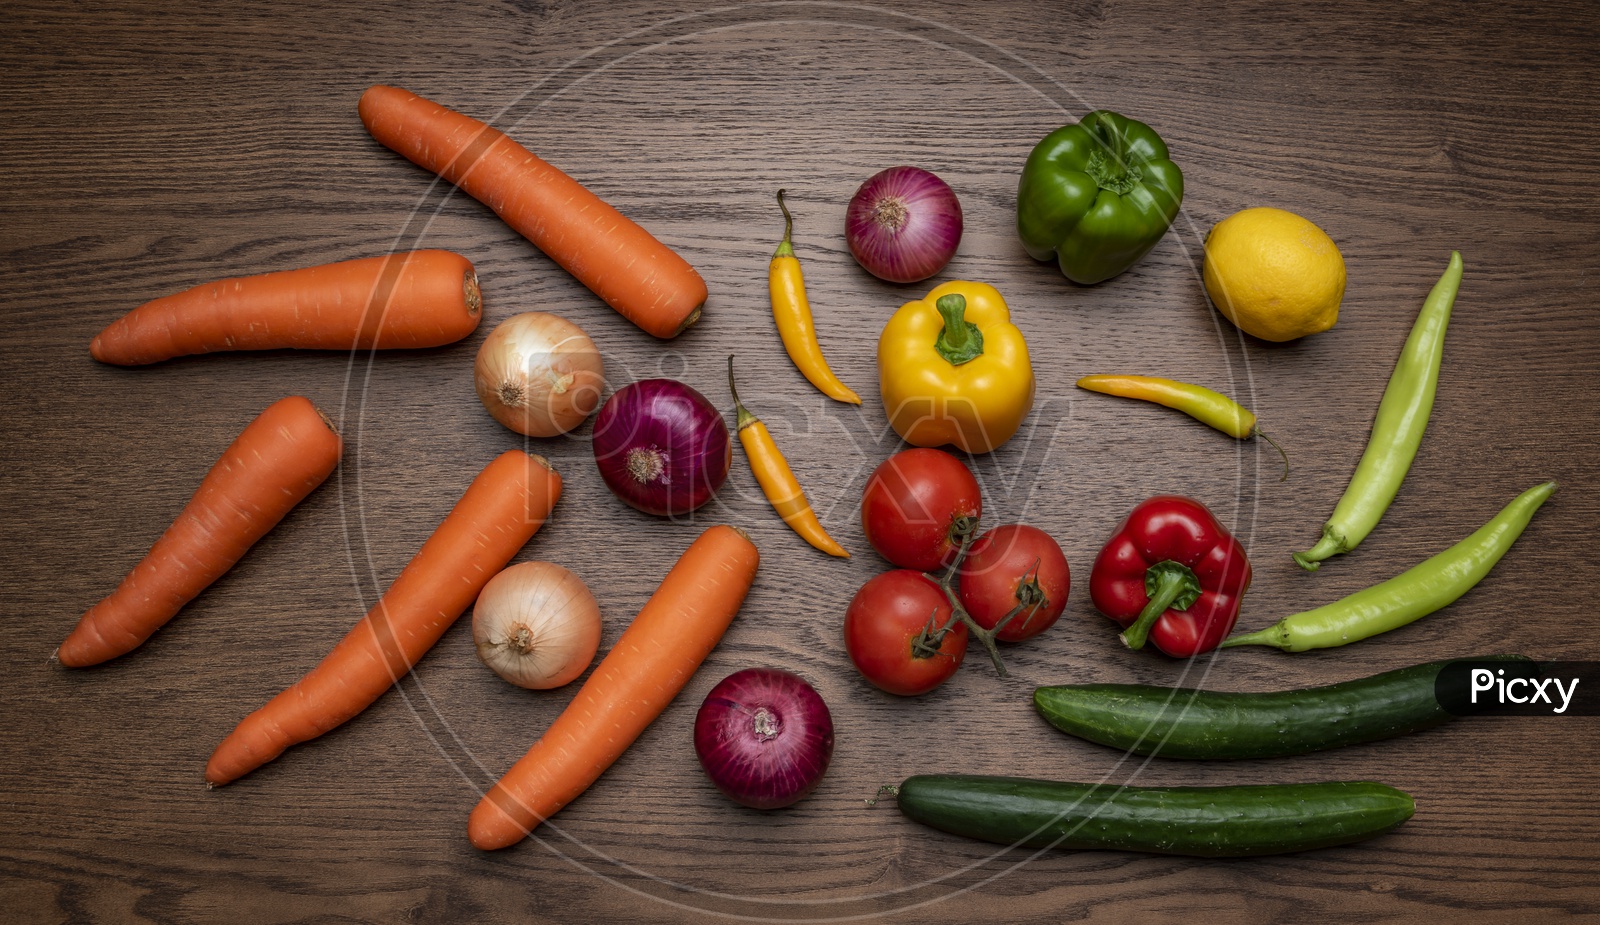 Top View of Fresh Vegetables on Wooden Background, Capsicum, Onions, Tomatoes